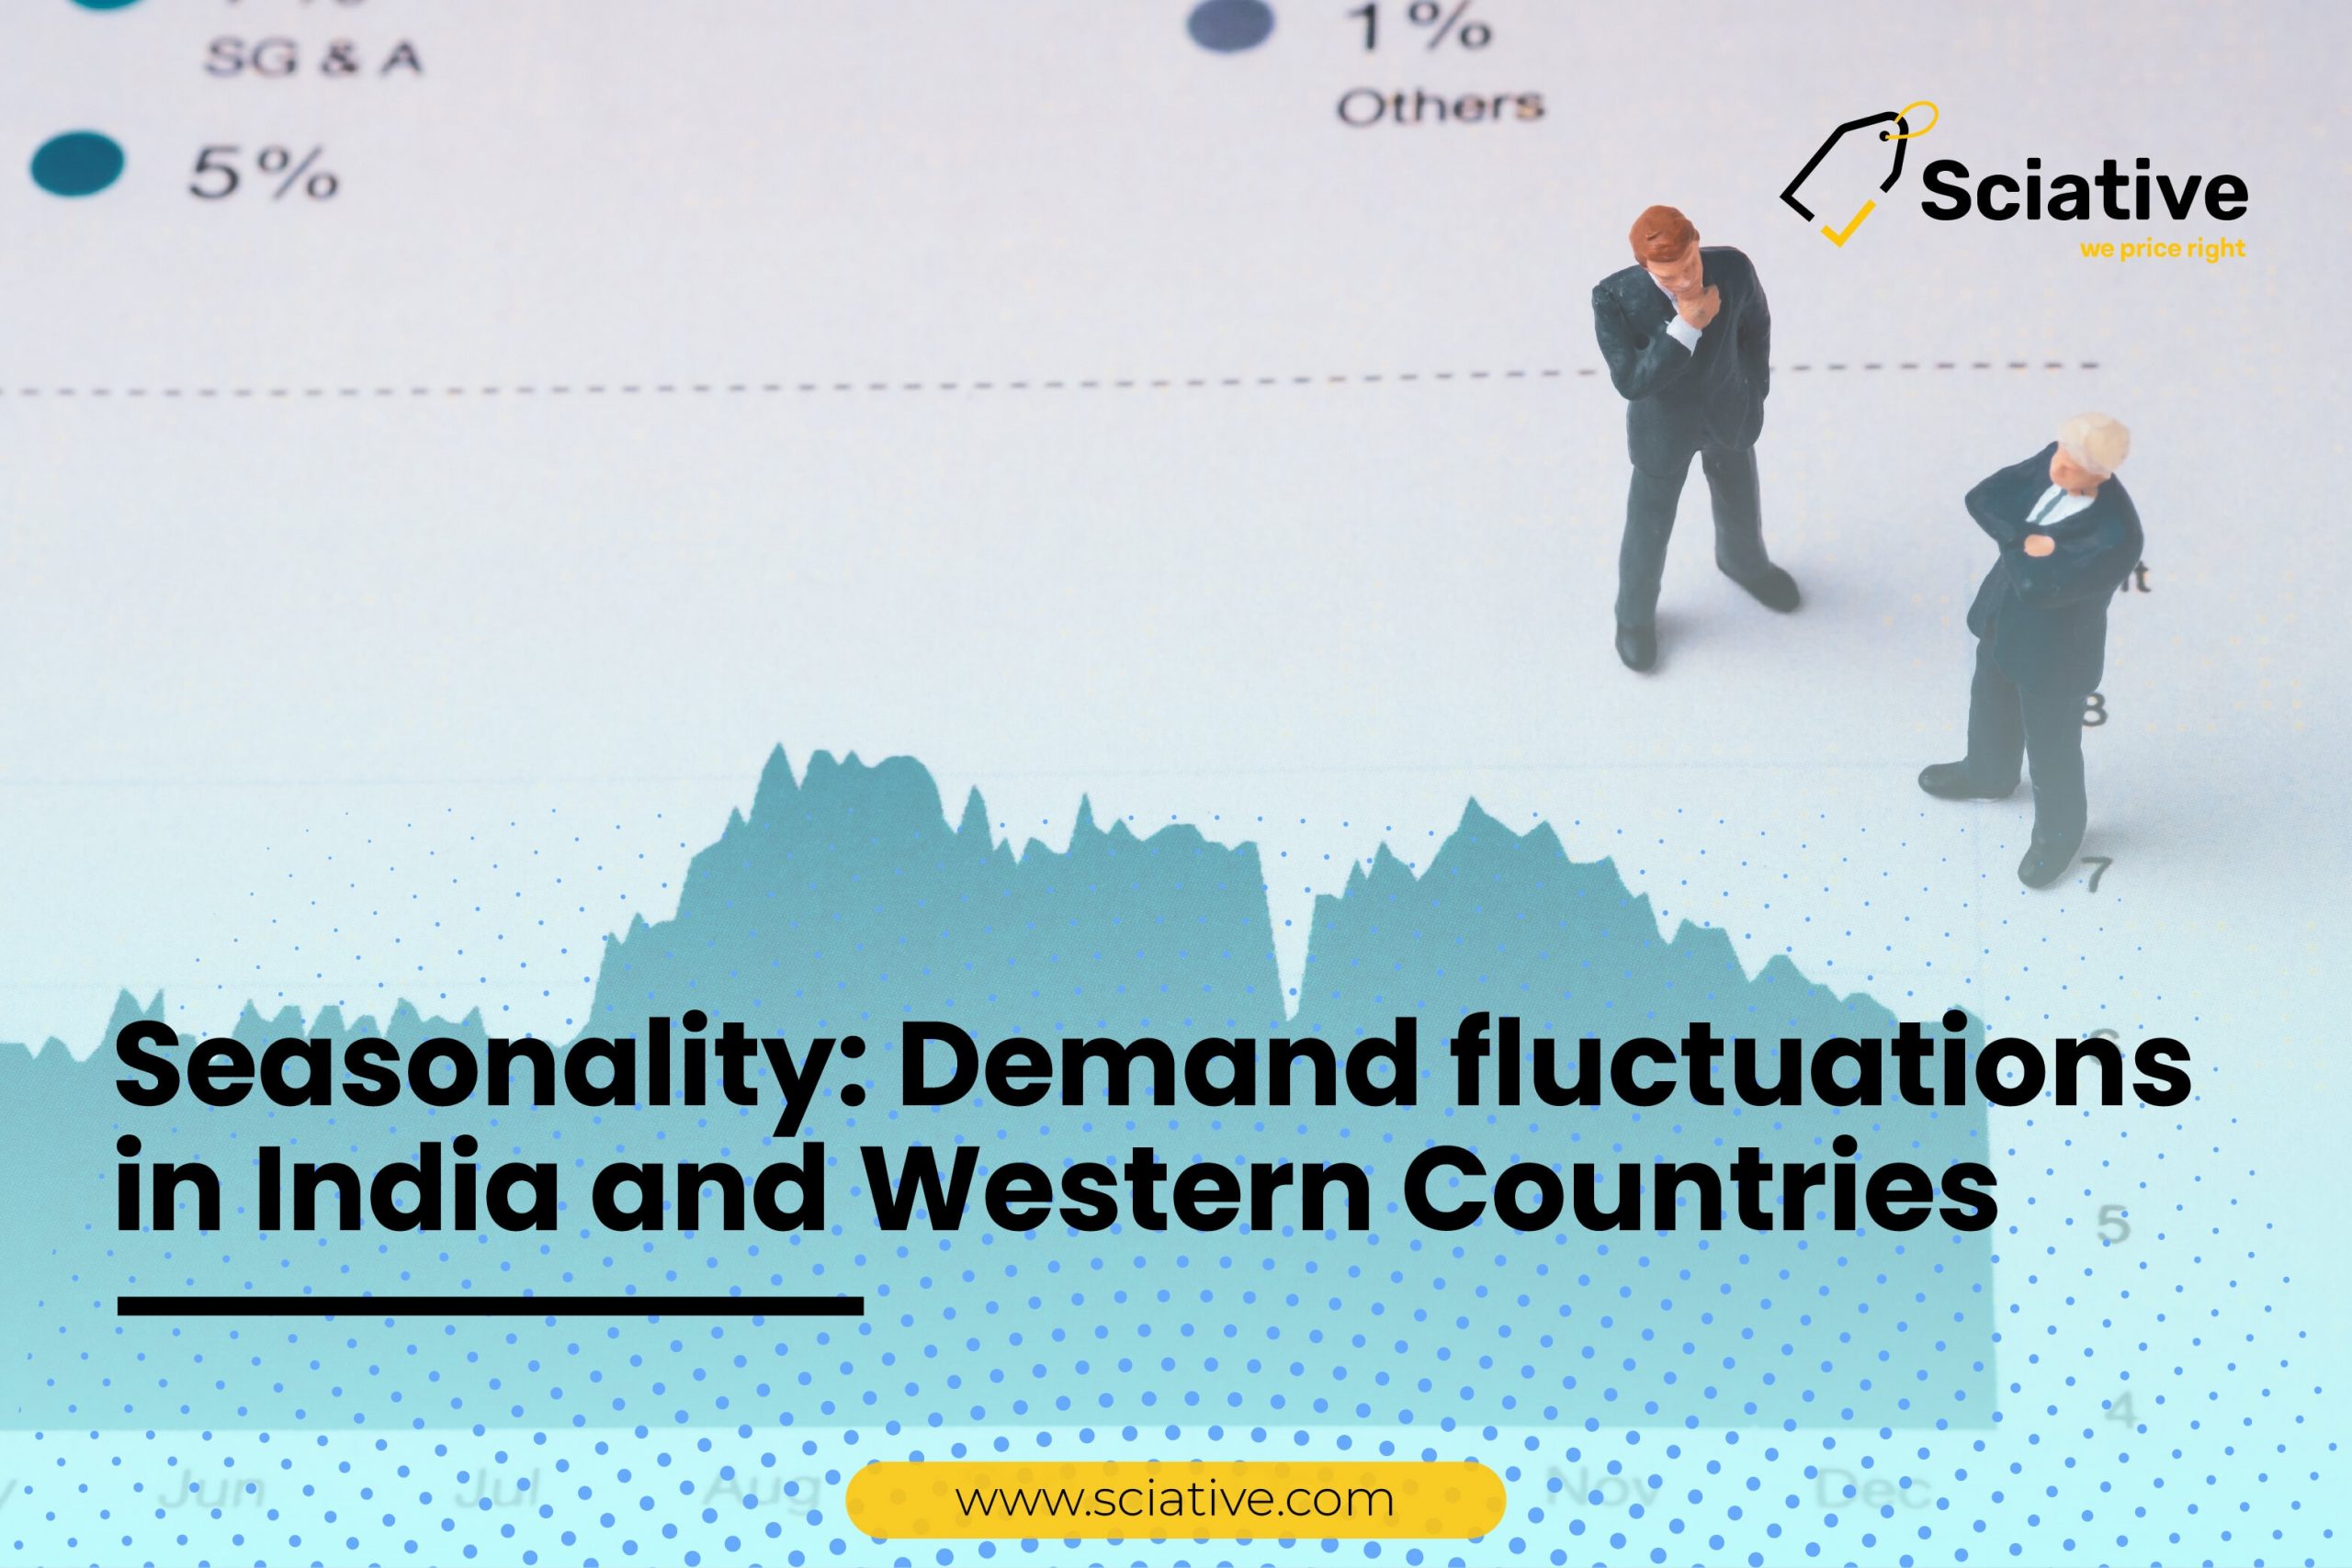 Seasonality: Demand fluctuations in India and Western Countries